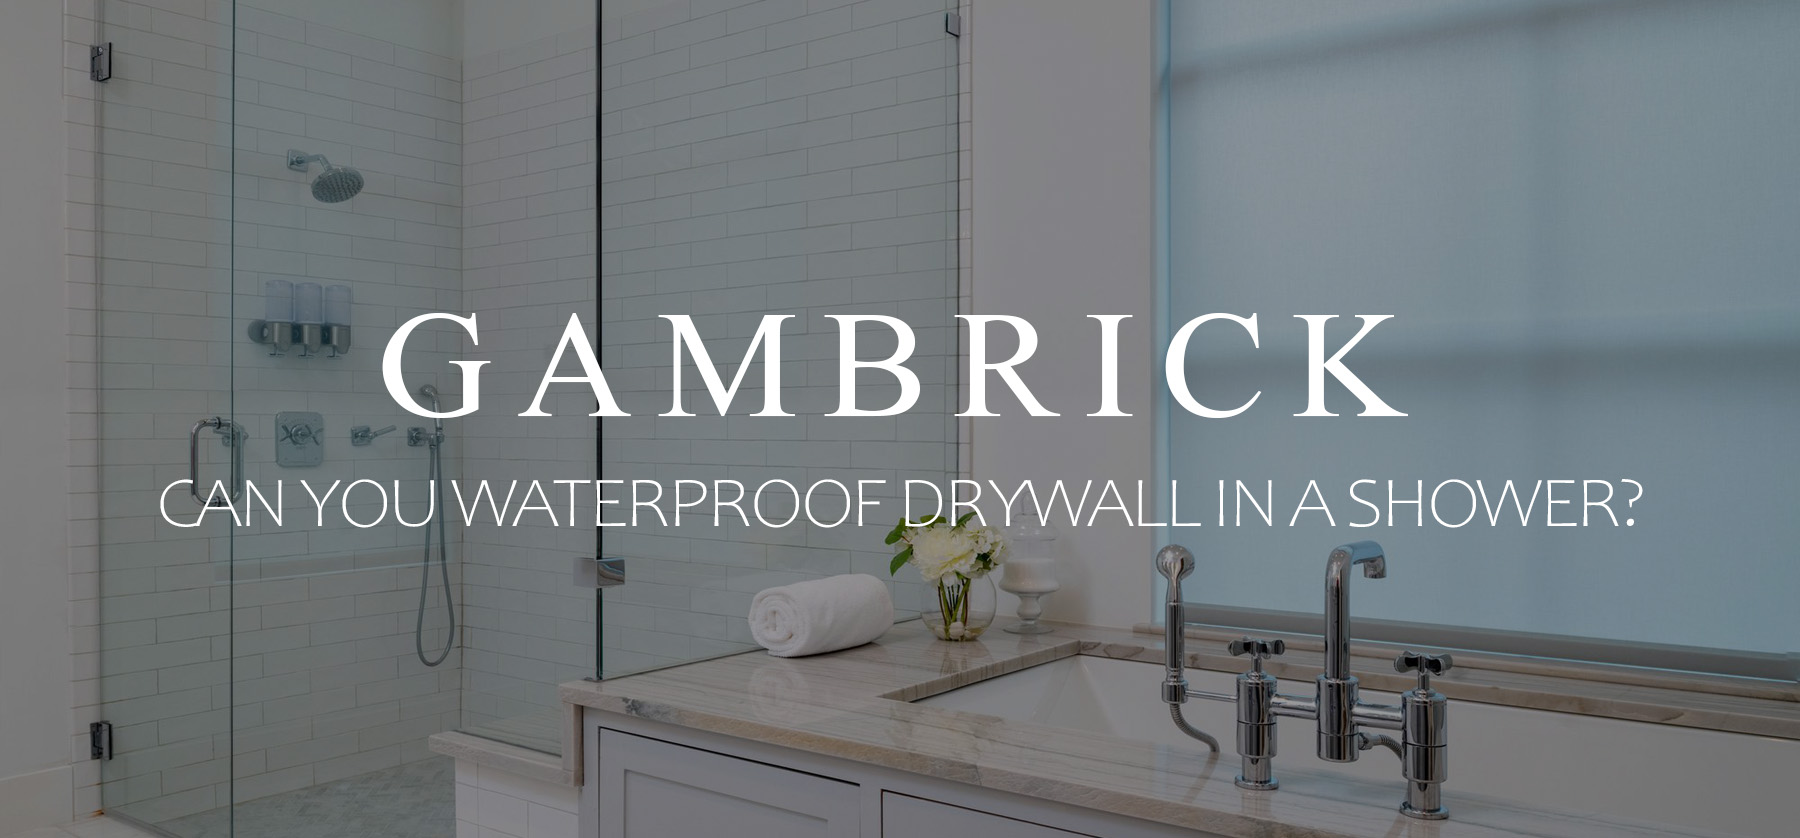 Can You Waterproof Drywall In A Shower Banner 1.0